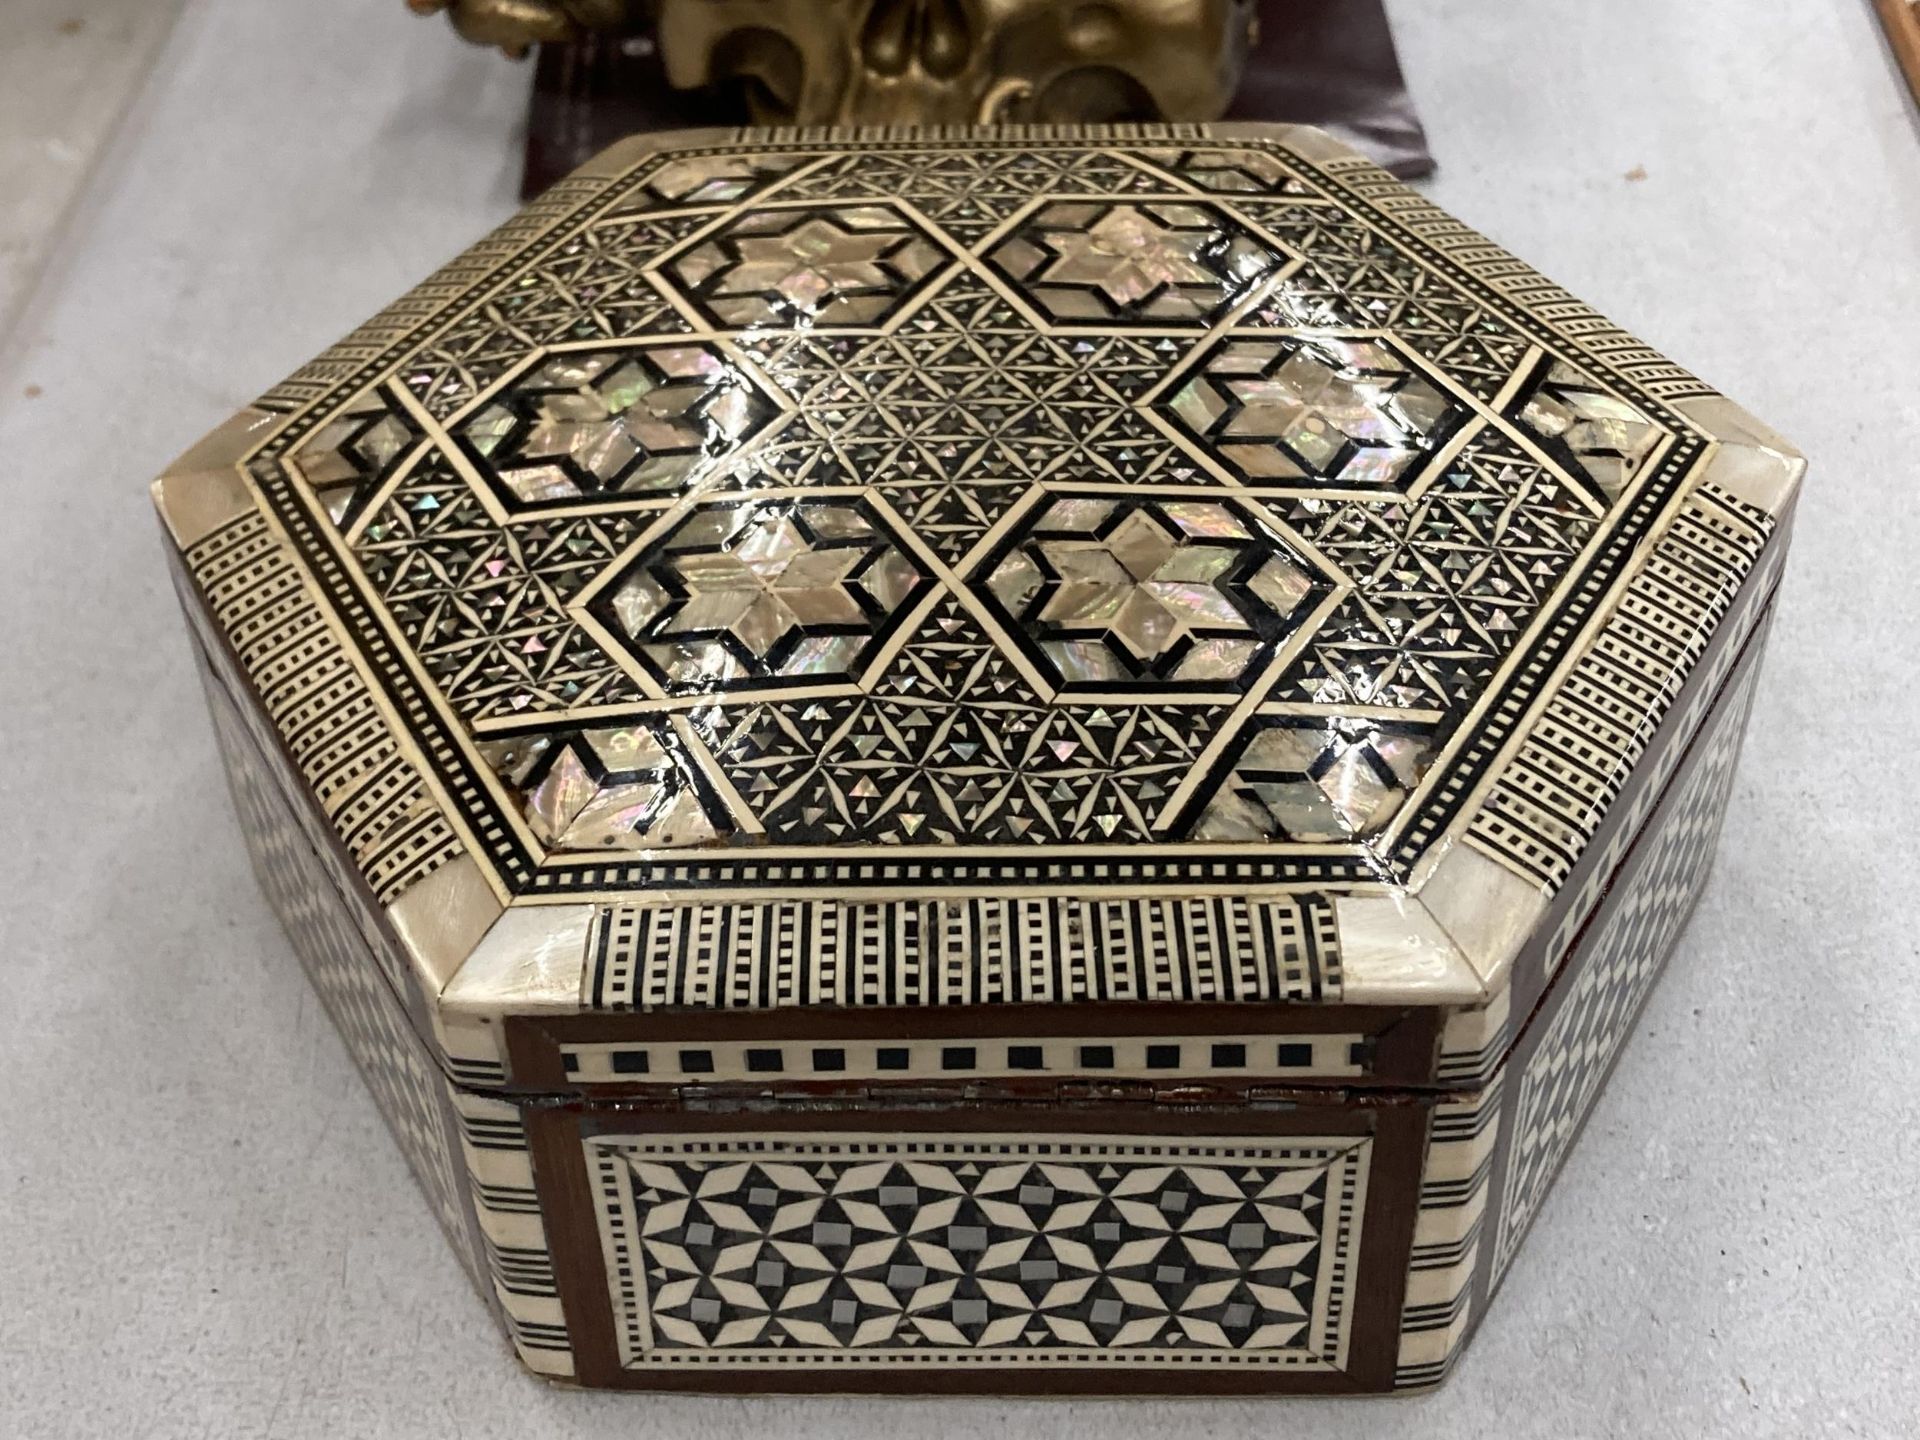 A DAMASK, MOTHER OF PEARL INLAID HEXAGONAL BOX